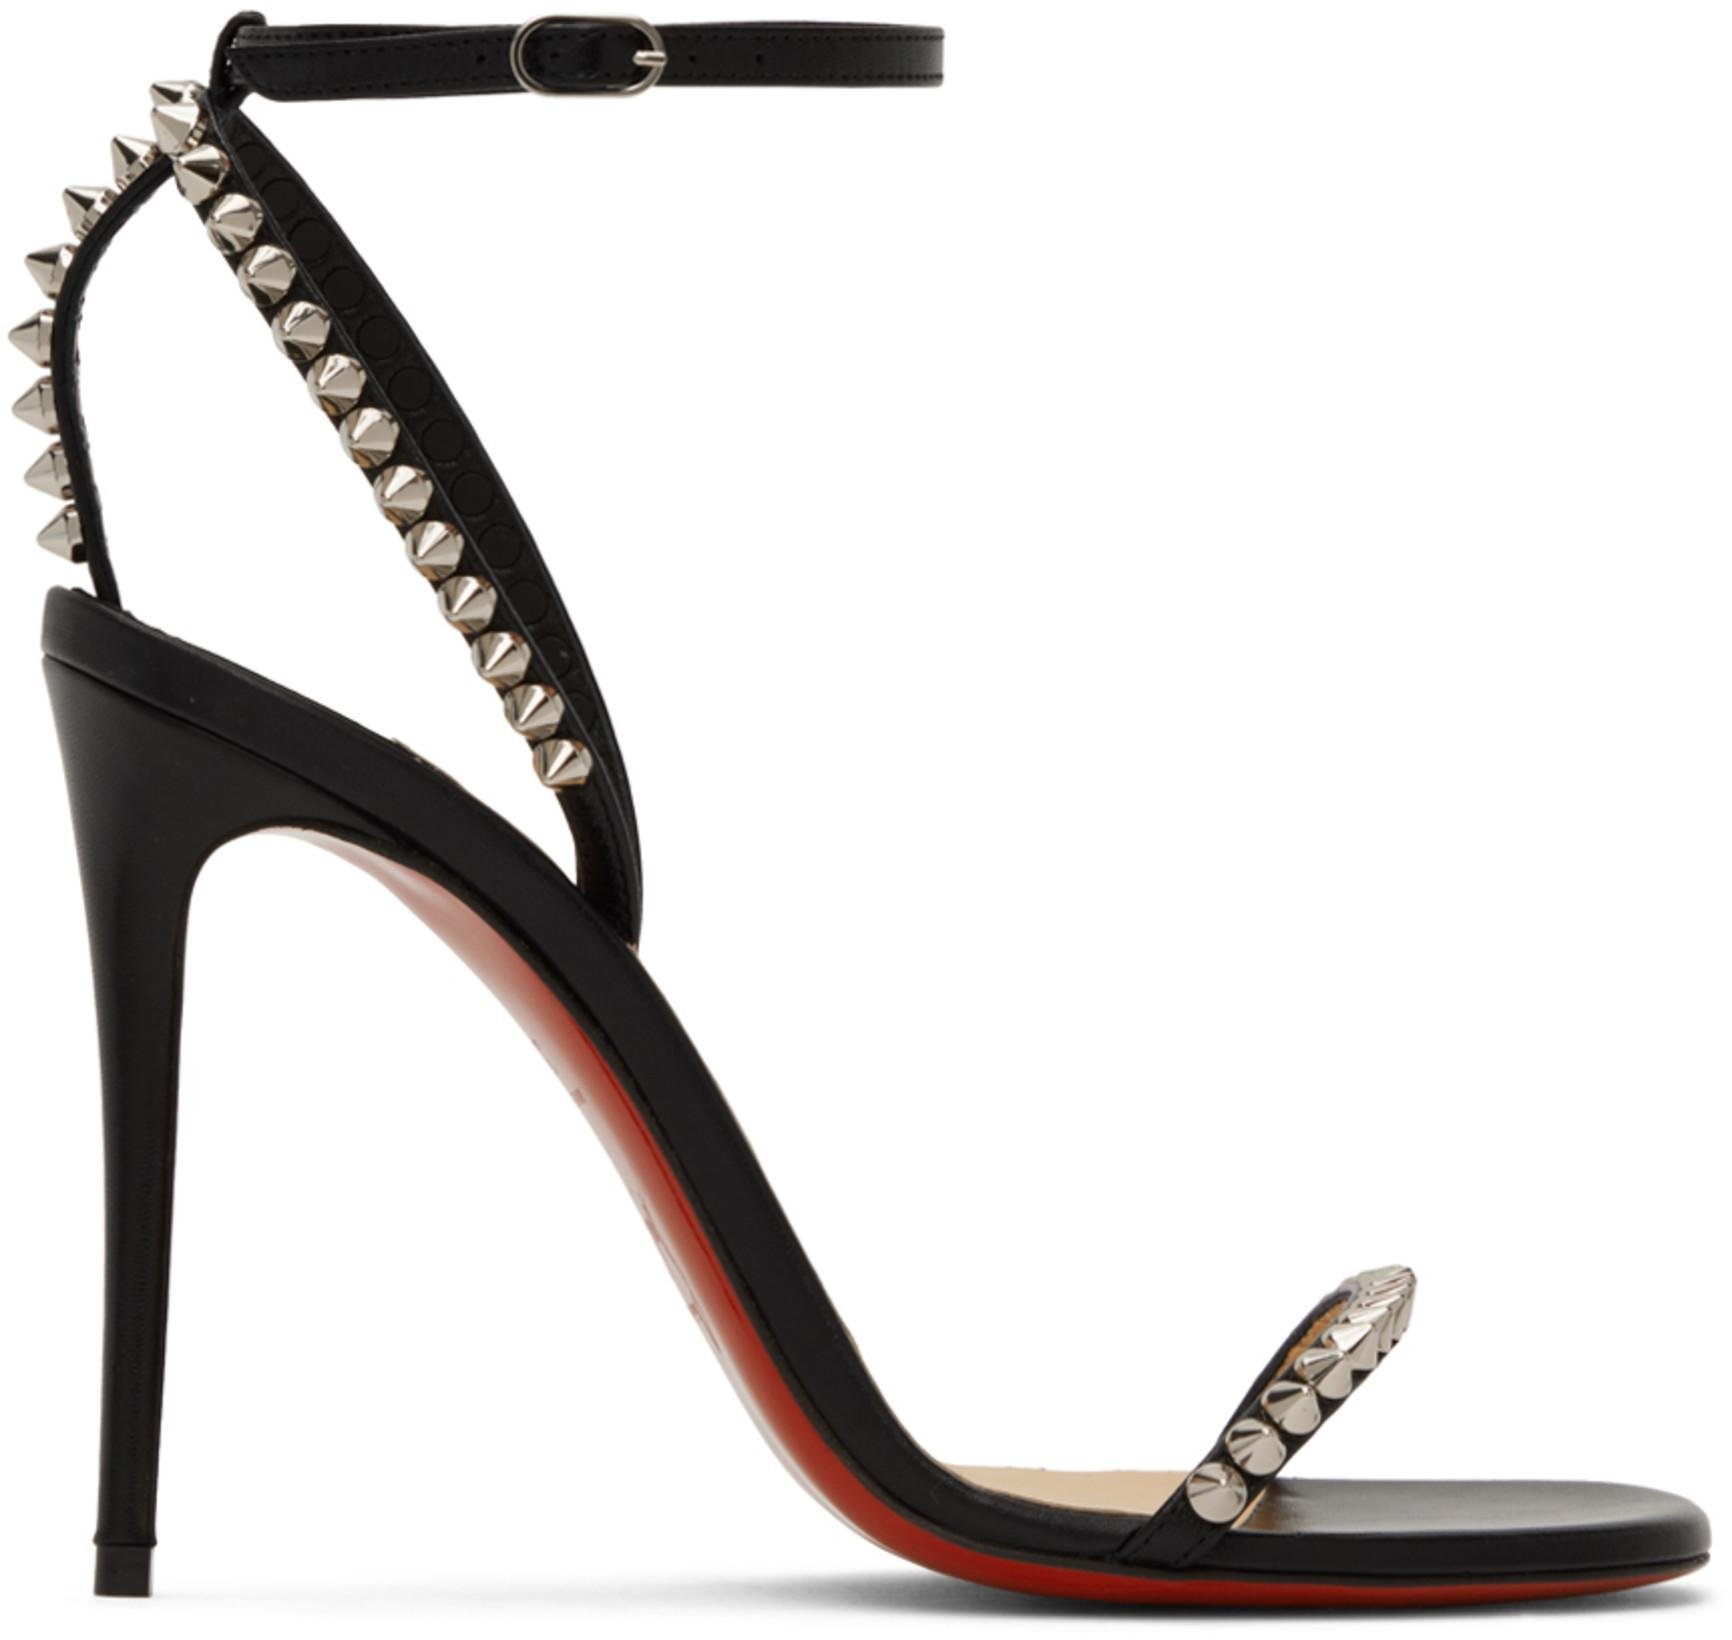 Black So Me 100 Heeled Sandals by CHRISTIAN LOUBOUTIN